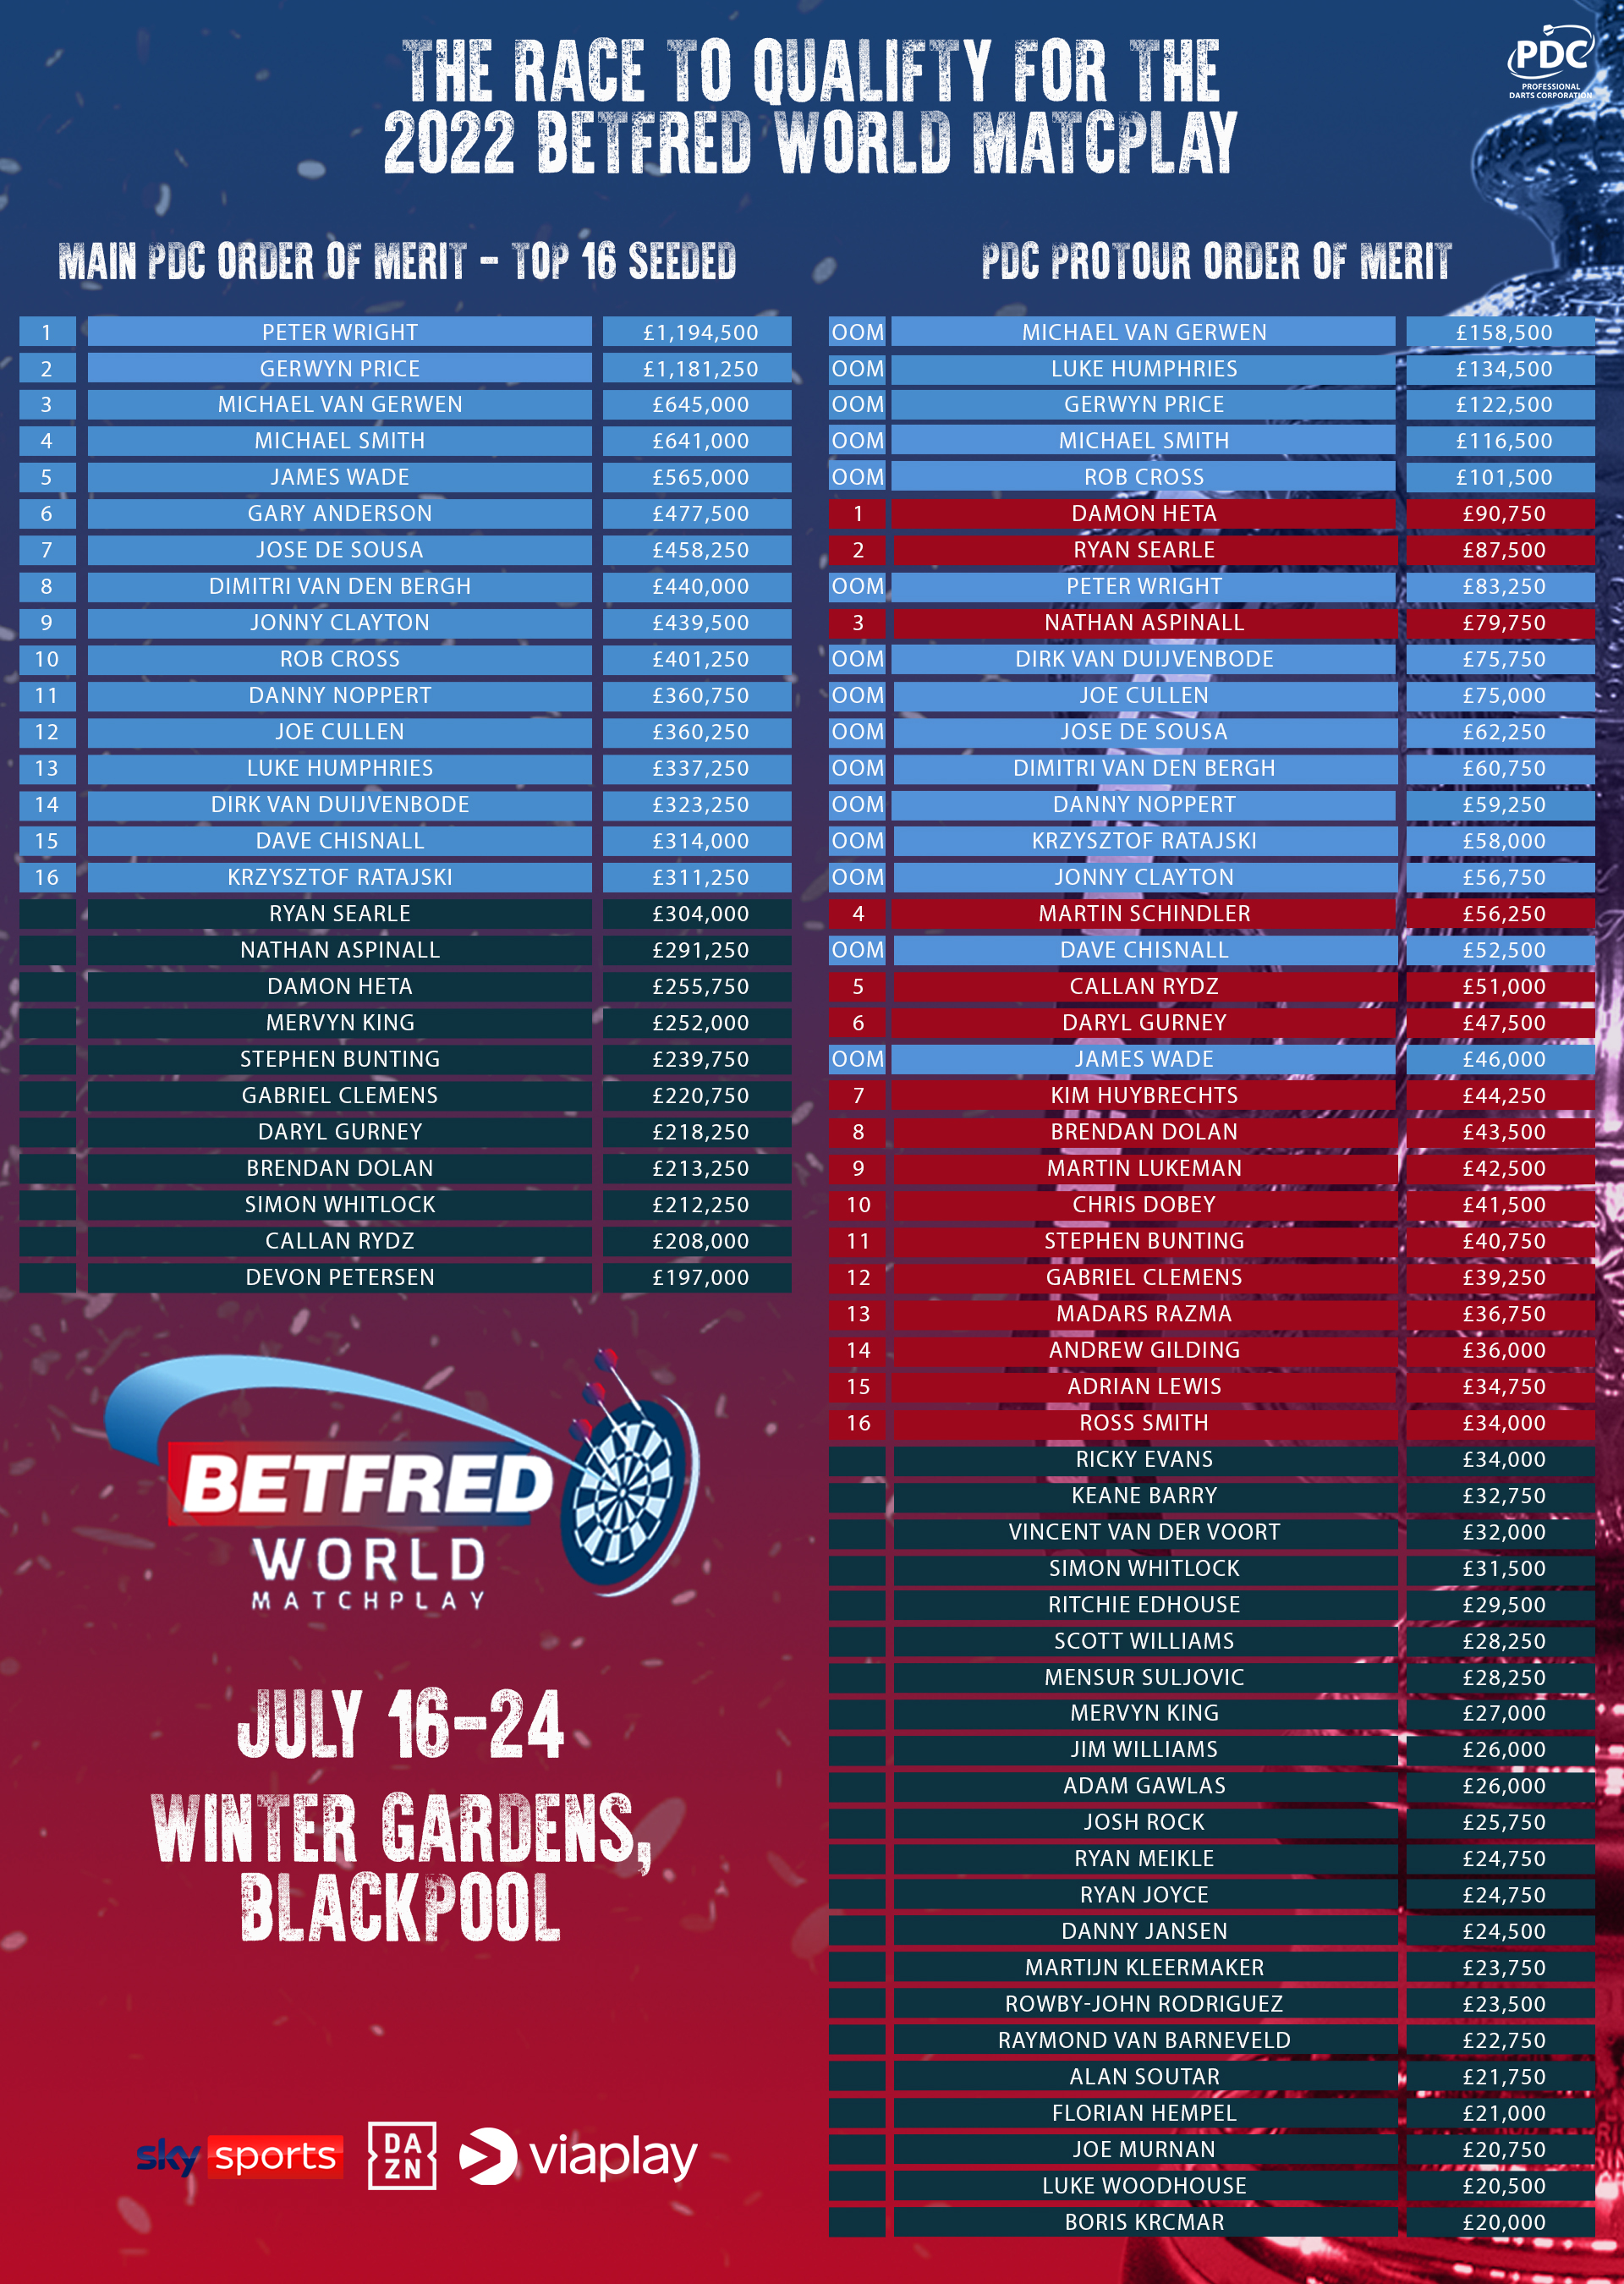 Race to qualify for the 2022 Betfred World Matchplay